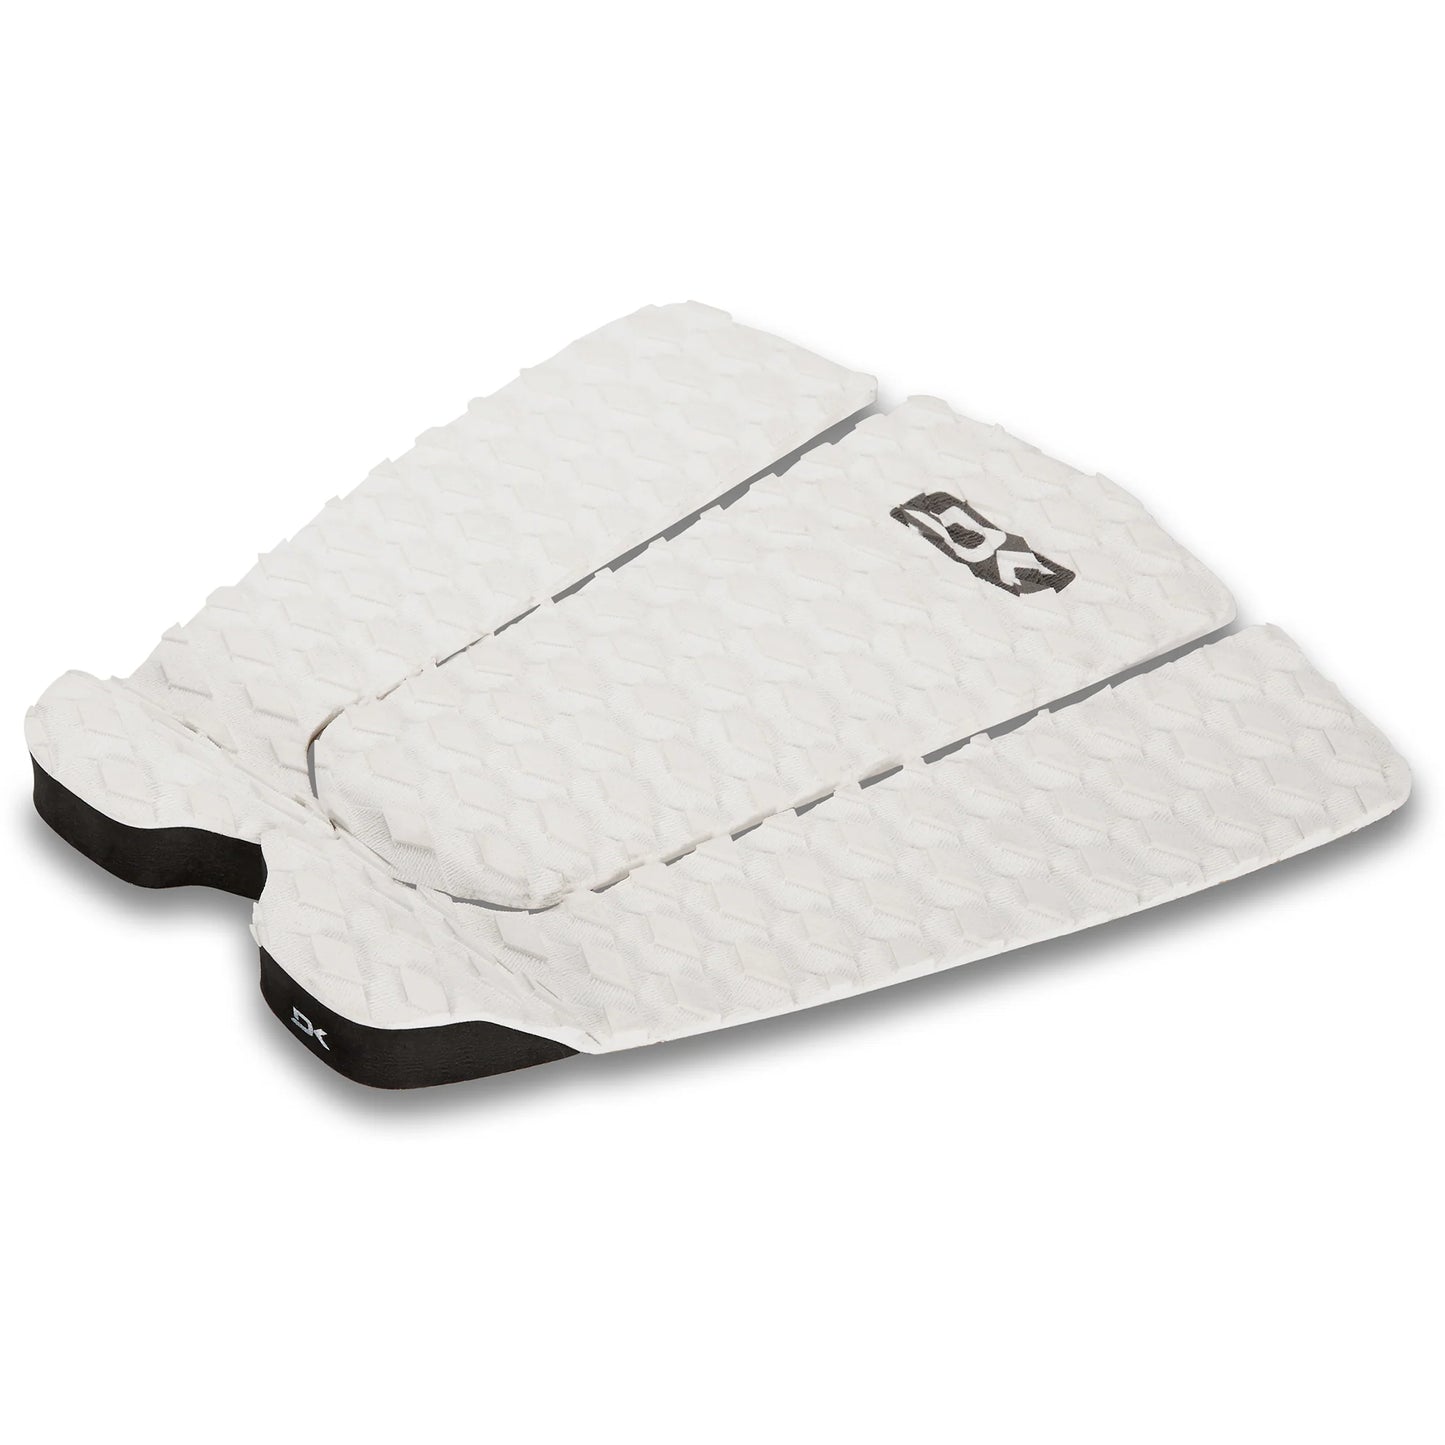 Dakine Andy Irons Pro Surf Traction - Black Traction Pad White